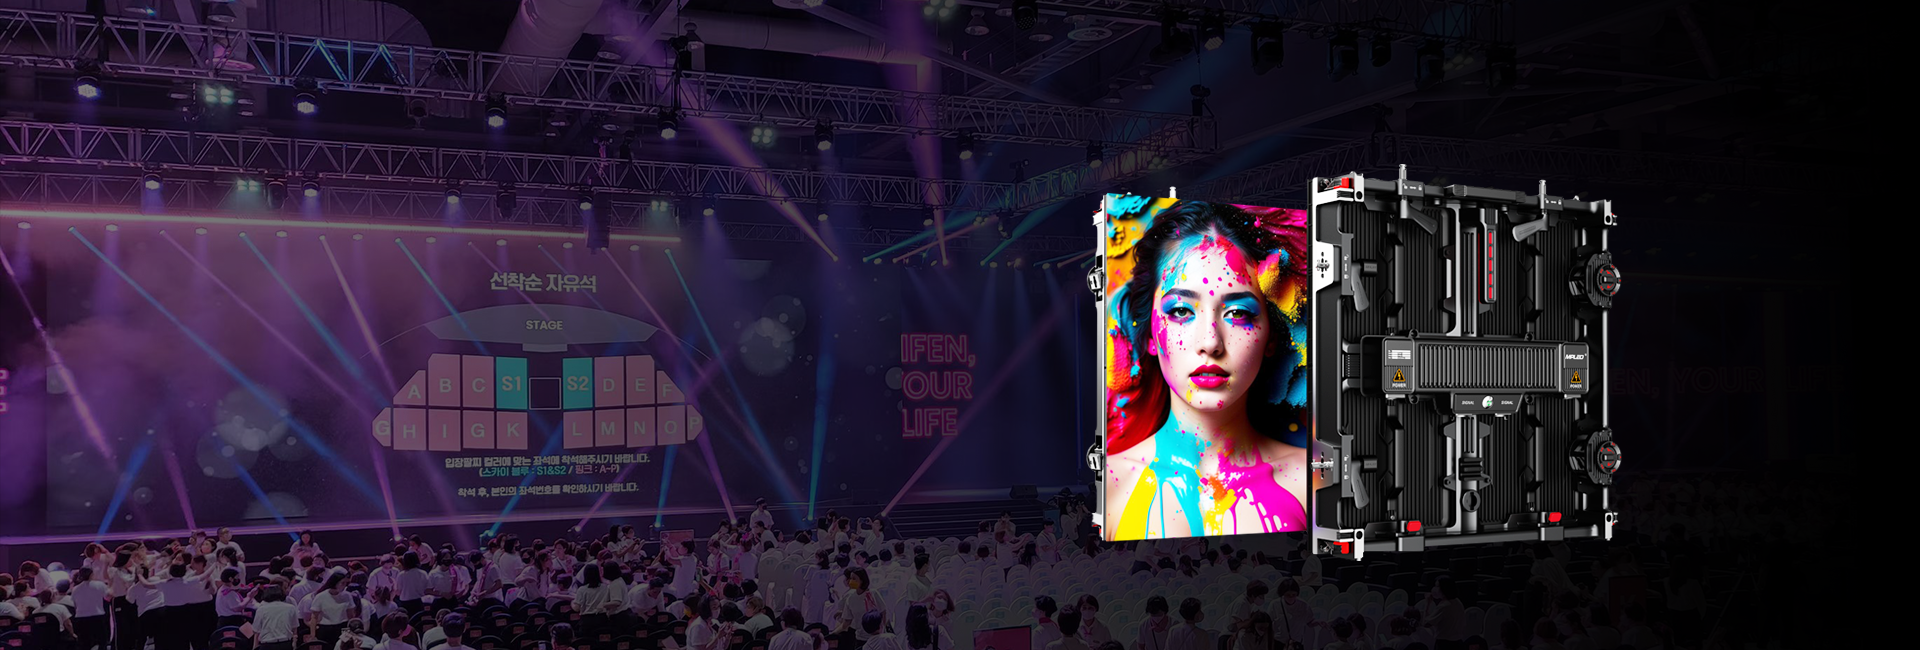 MPLED RS stage rental led display wall